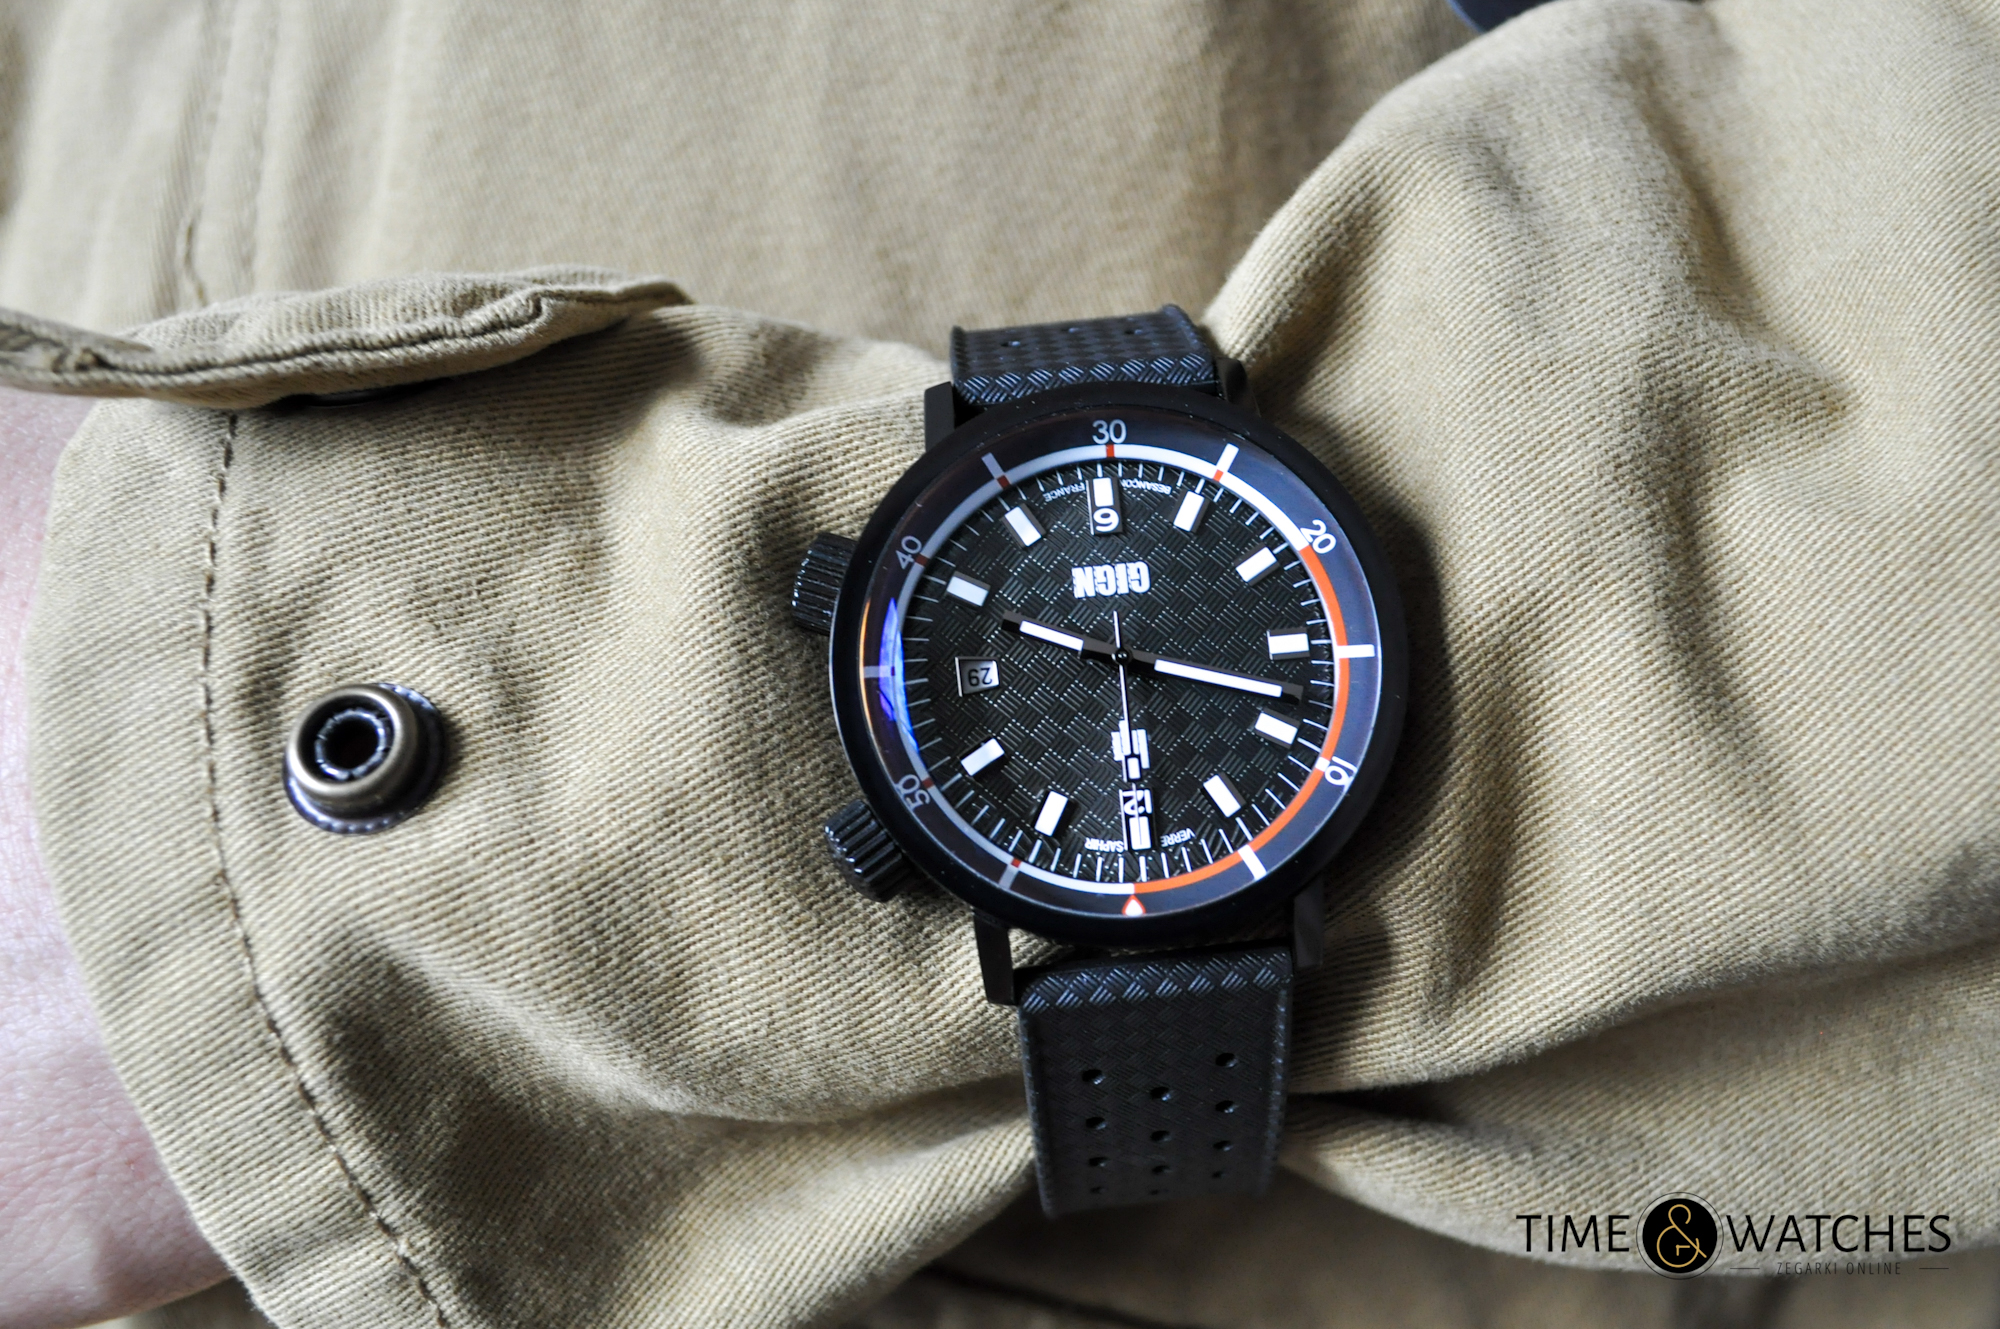 lip nautic gign timeandwatches.pl